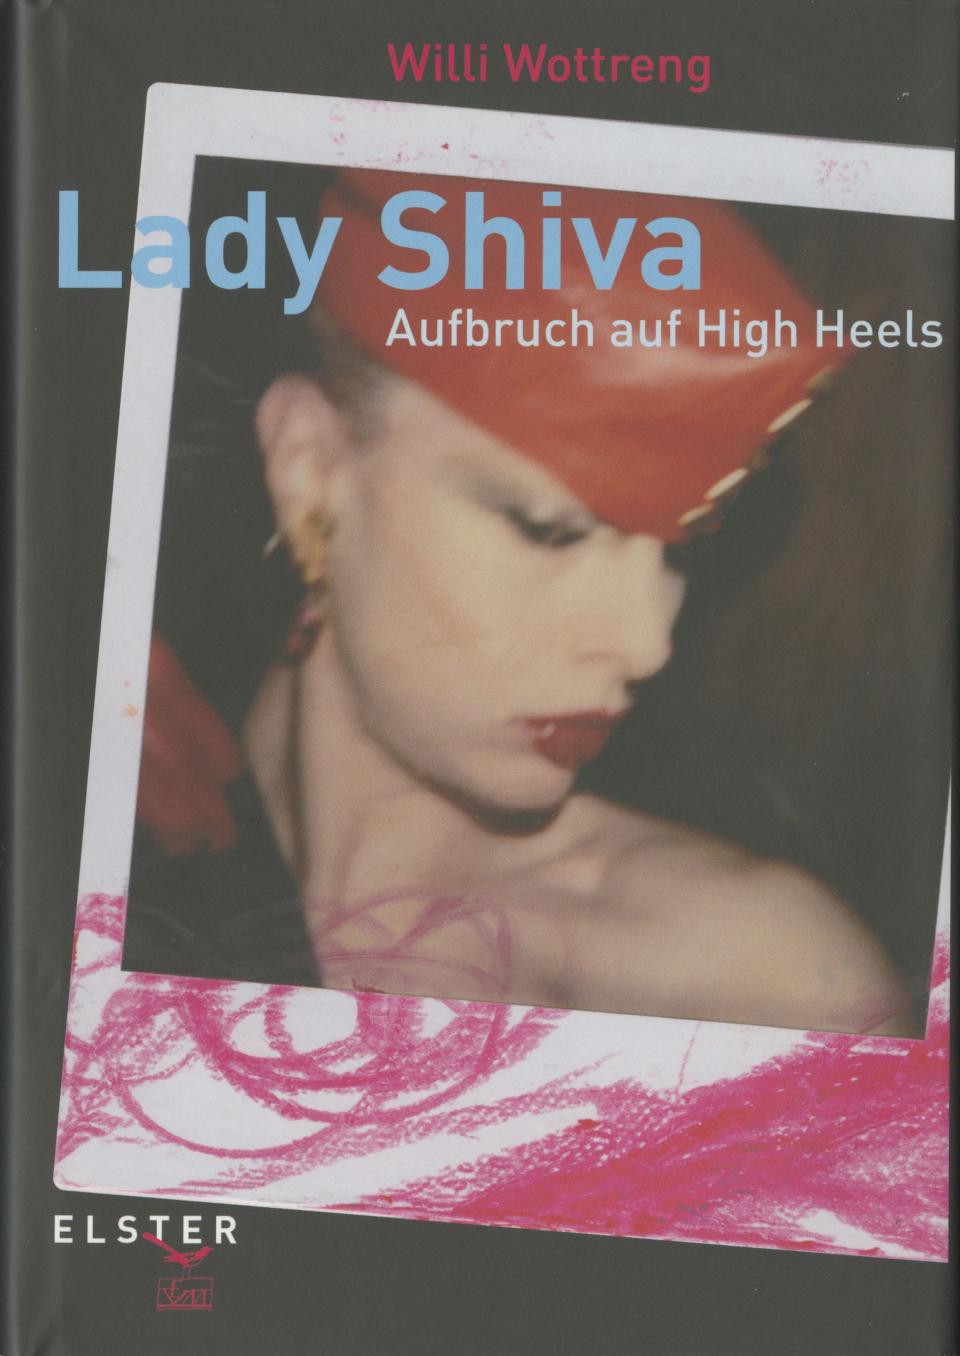 book cover with photography and text